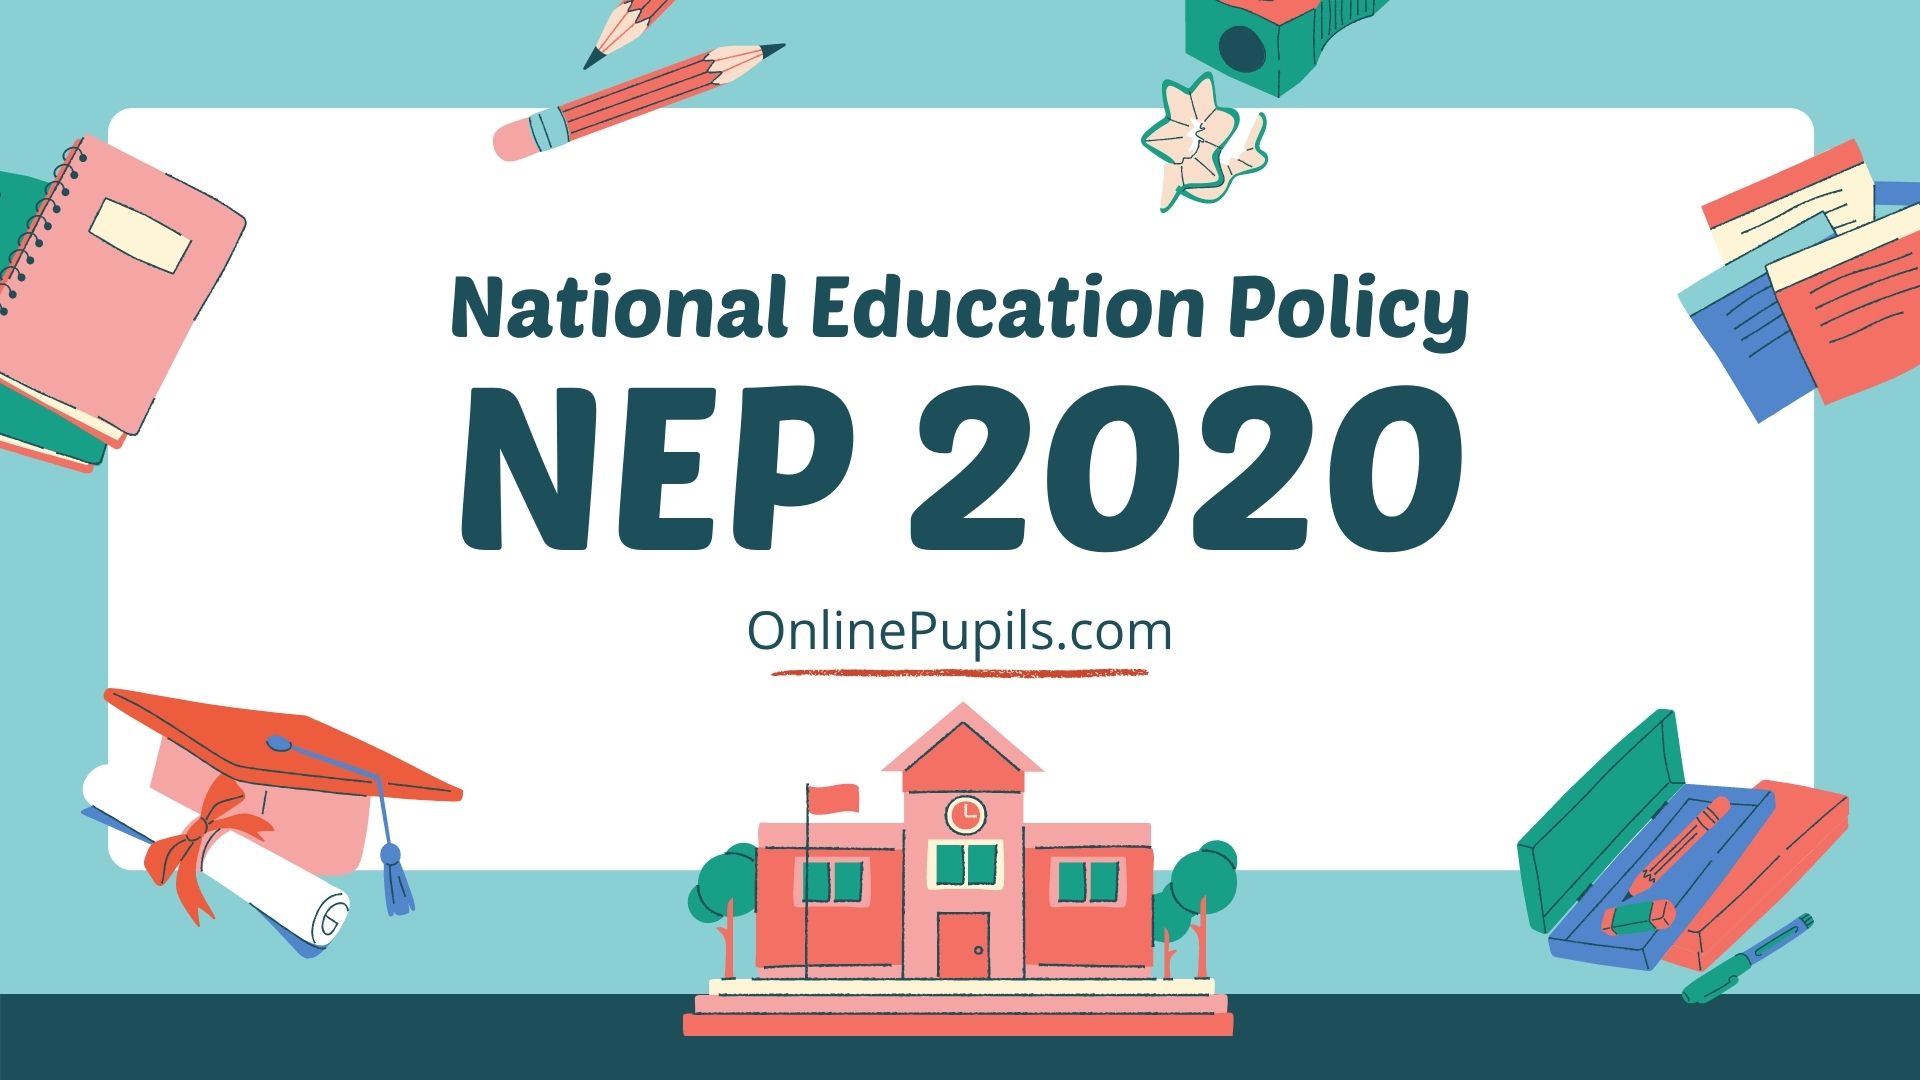 Know about the National Education Policy 2020